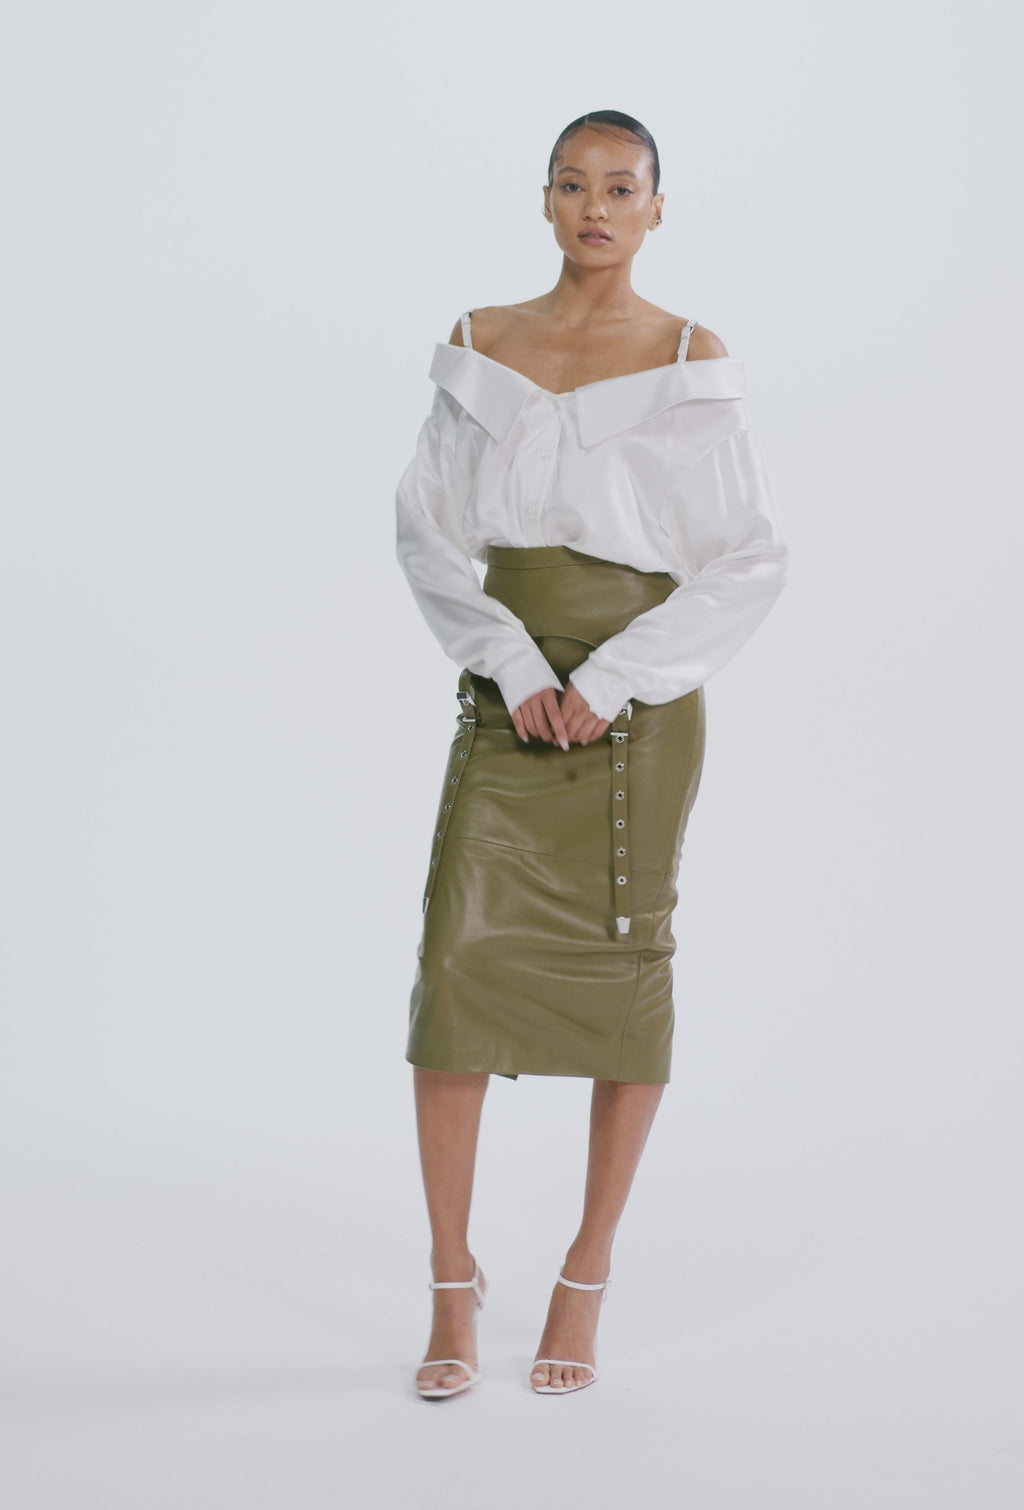 PRITCH ROGUE SUSPENDER PENCIL SKIRT OLIVE